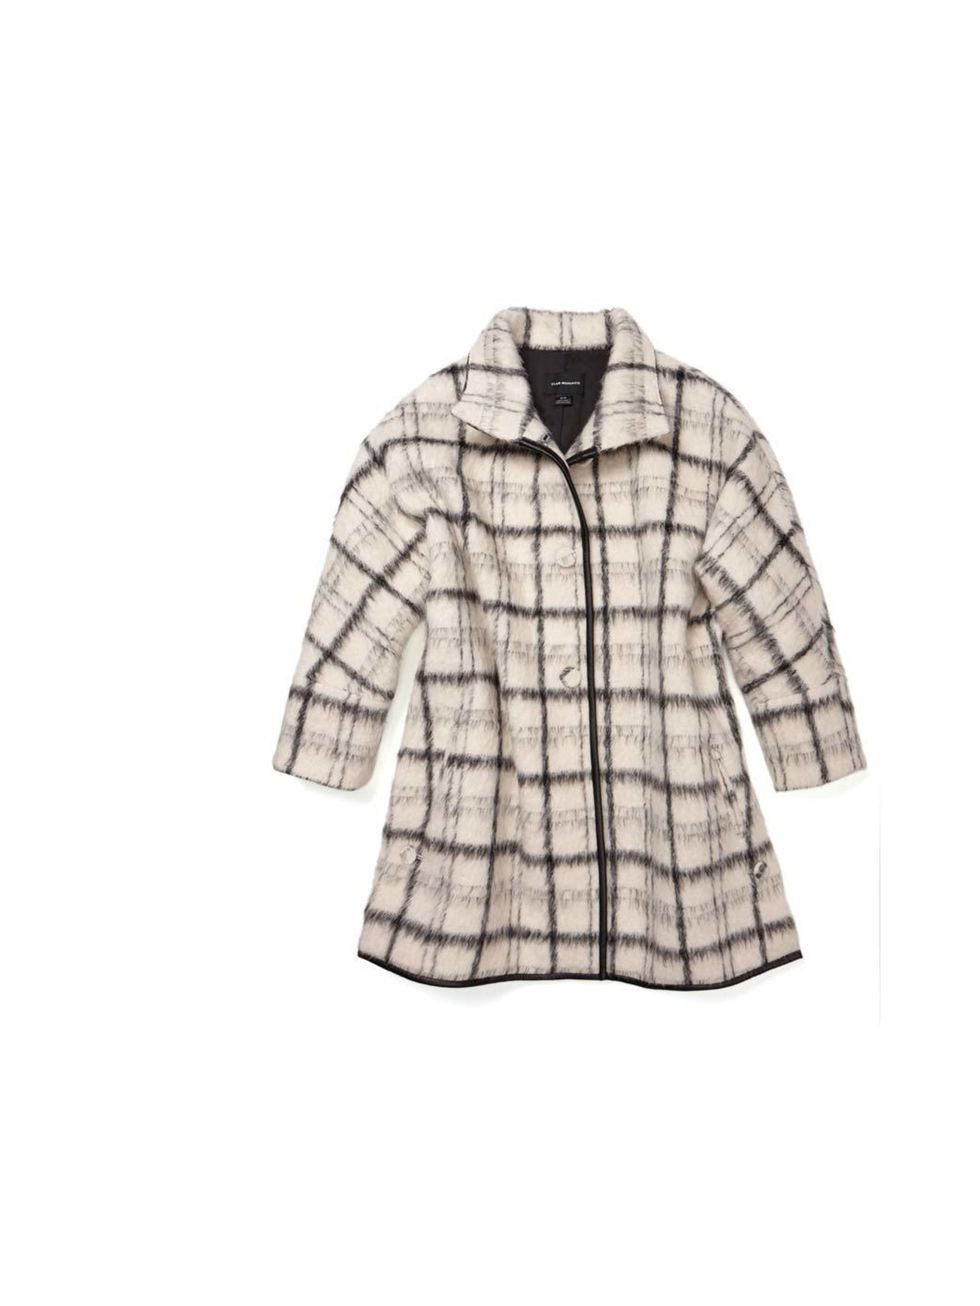 <p>Pair this monochrome checked coat with a block-colour cable knit jumper and skinny jeans for a classic weekend look.</p><p>Club Monaco coat, £640</p>